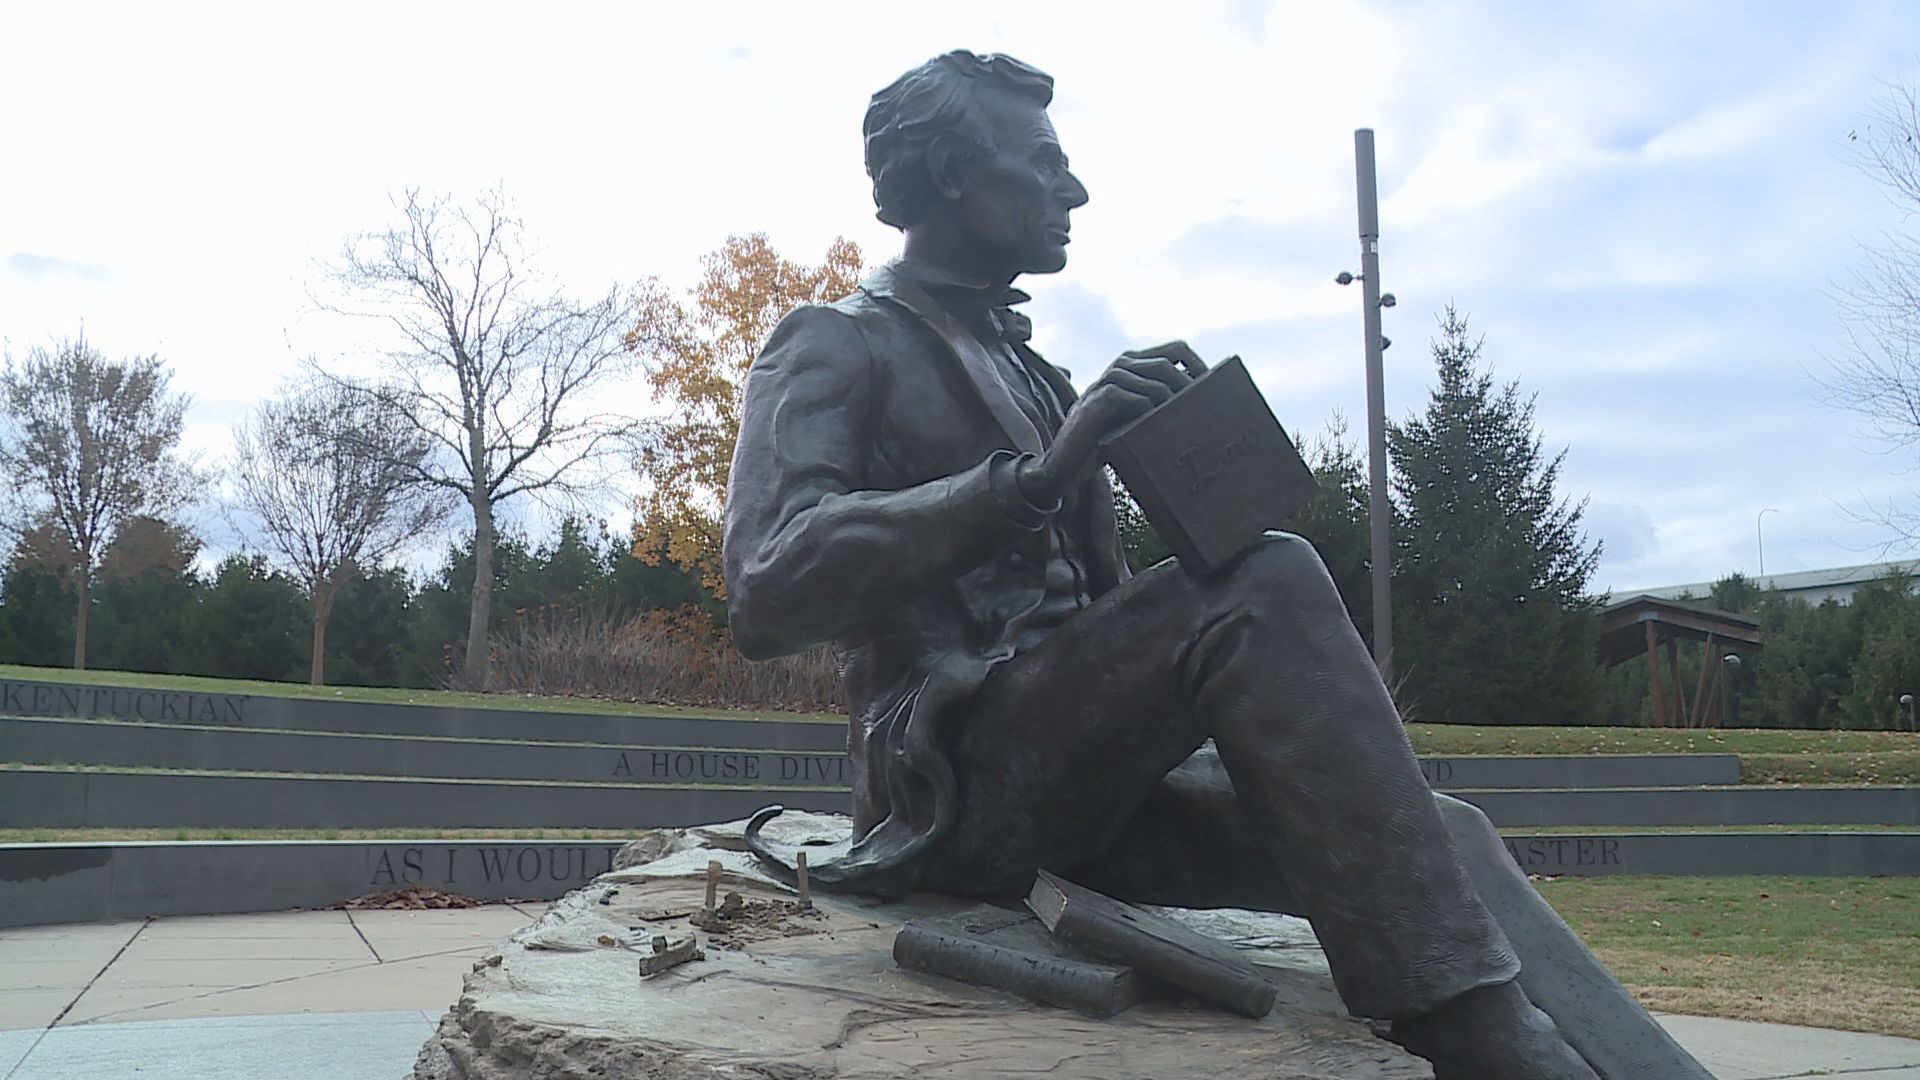 The hat, which normally sits next to the statue of Abraham Lincoln sitting on rock, was seemingly pried off and stolen.